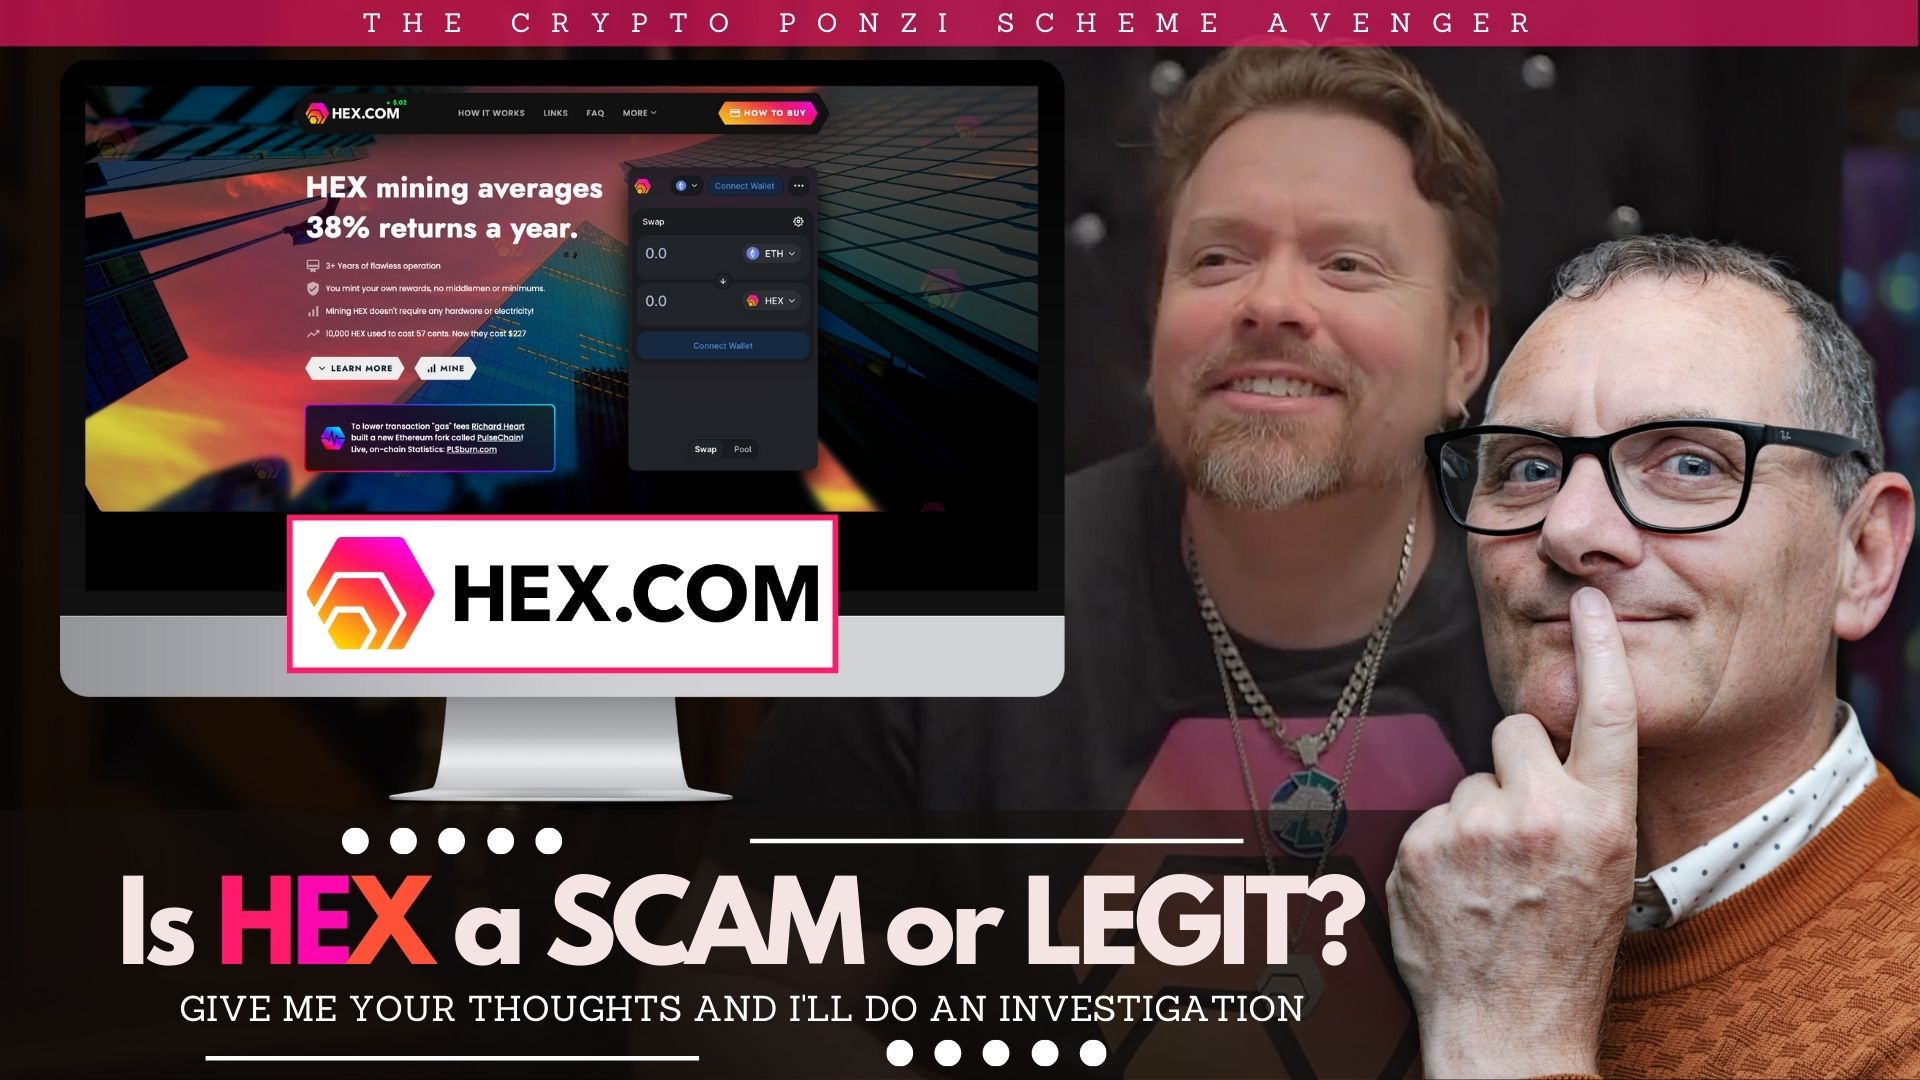 HEX: SCAM or LEGIT? Unveiling Truth About This Controversial Crypto! The Crypto Ponzi Scheme Avenger